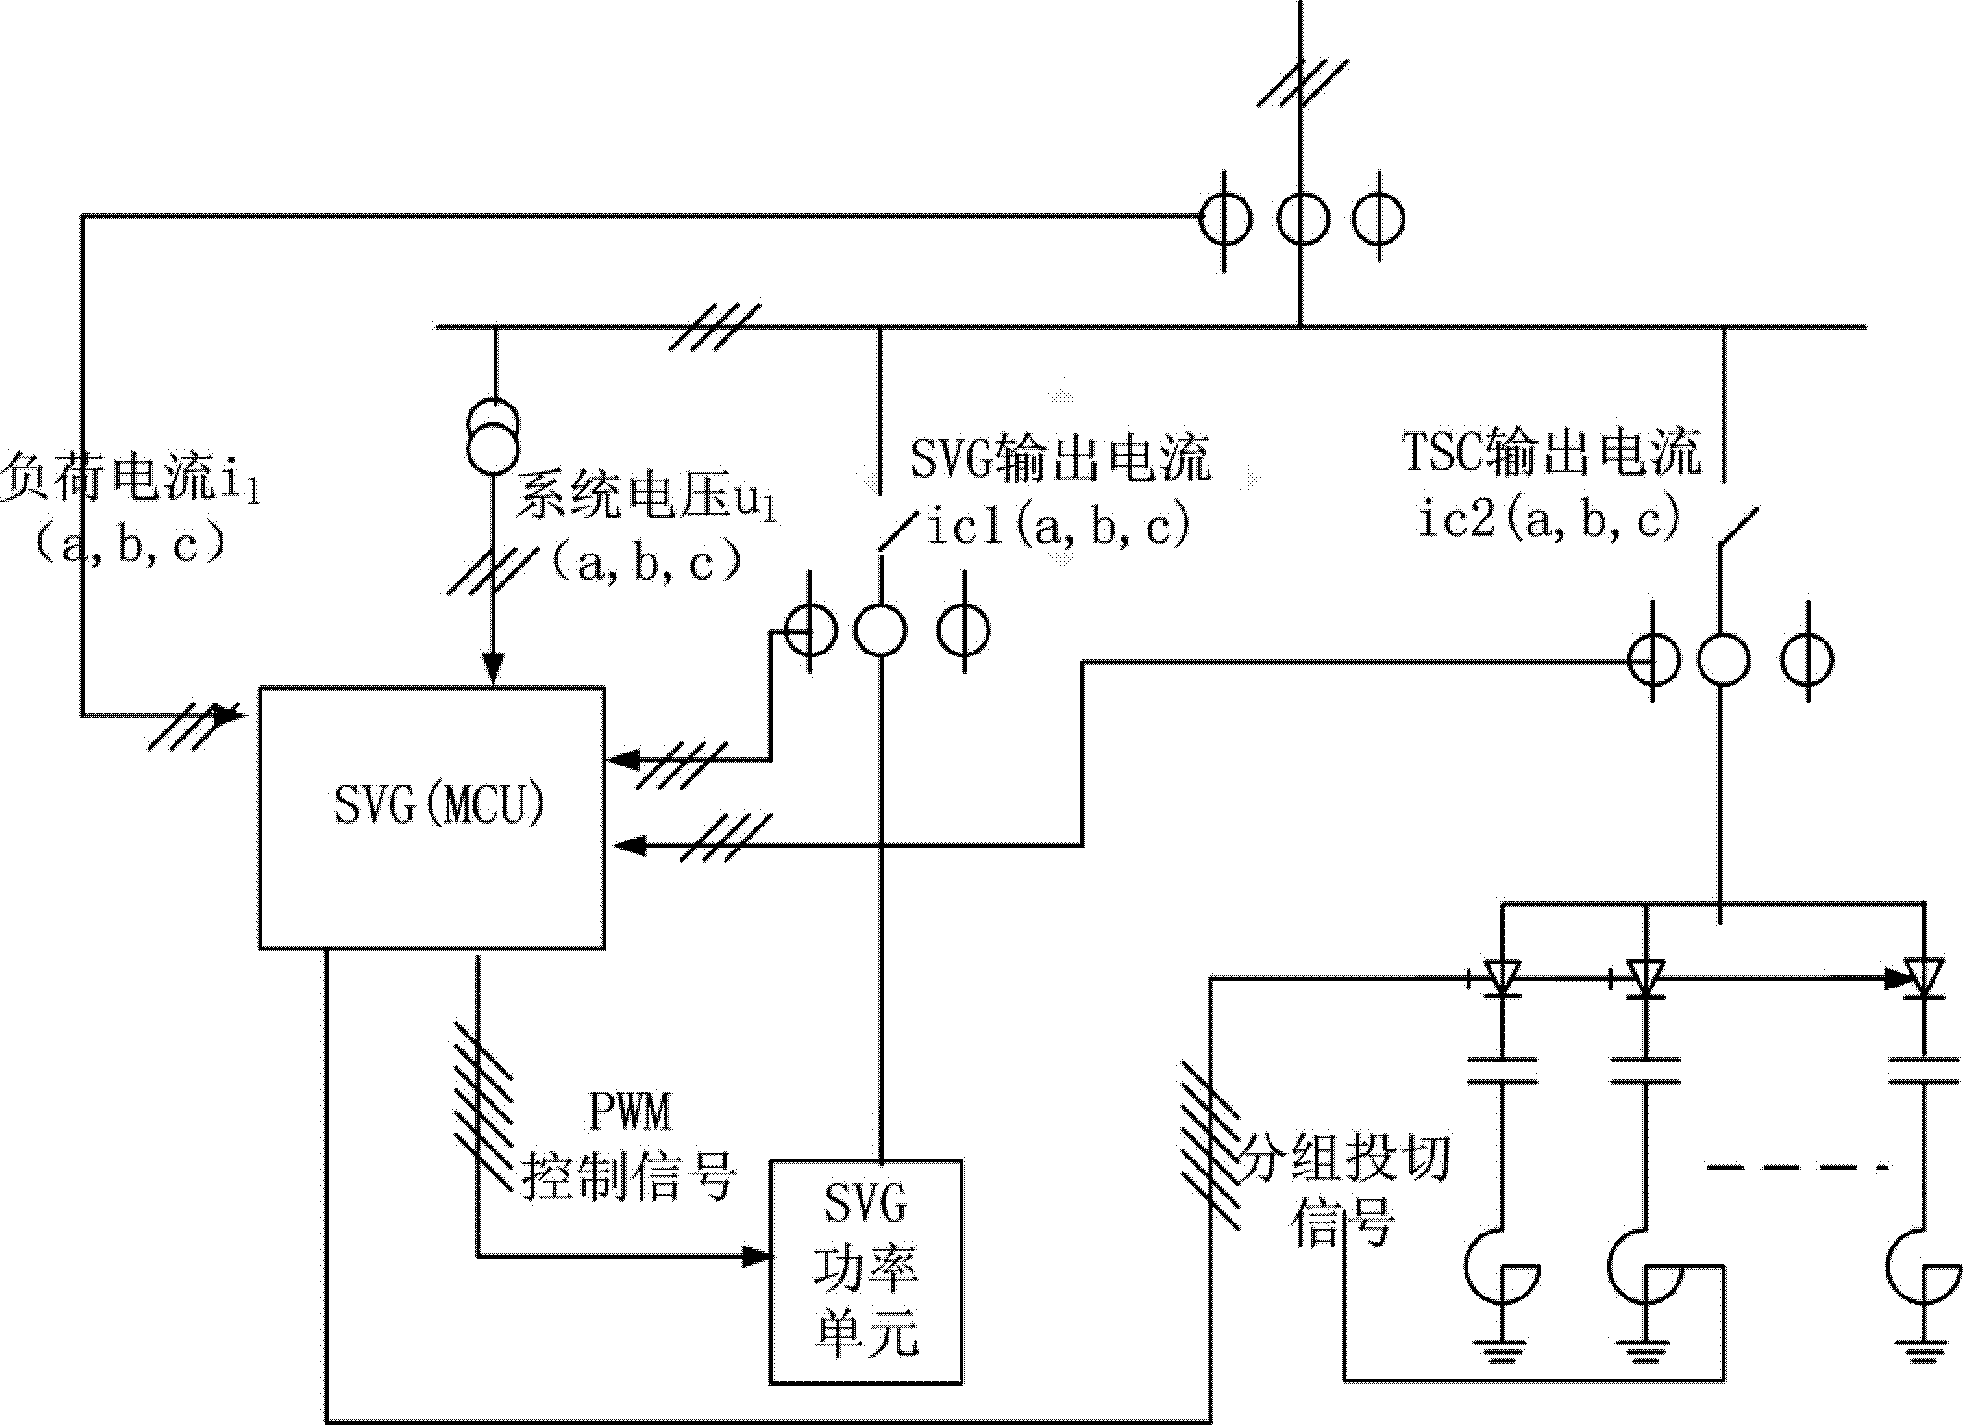 Method for carrying out intelligent control on dynamic reactive power compensation of SVG (TSC) (static var generator (thyristor switched capacitor))